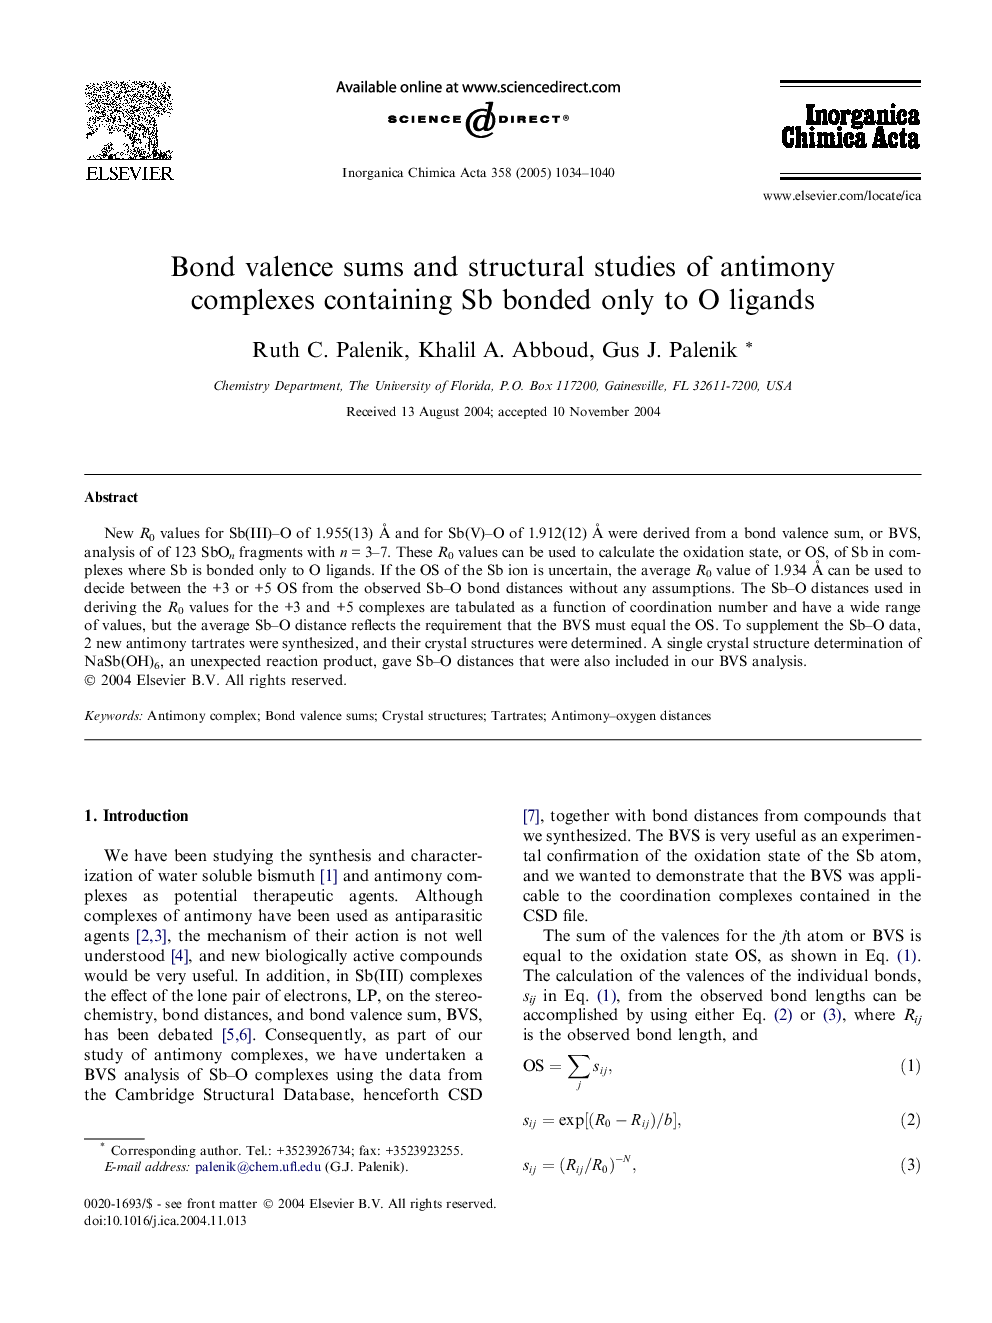 Bond valence sums and structural studies of antimony complexes containing Sb bonded only to O ligands